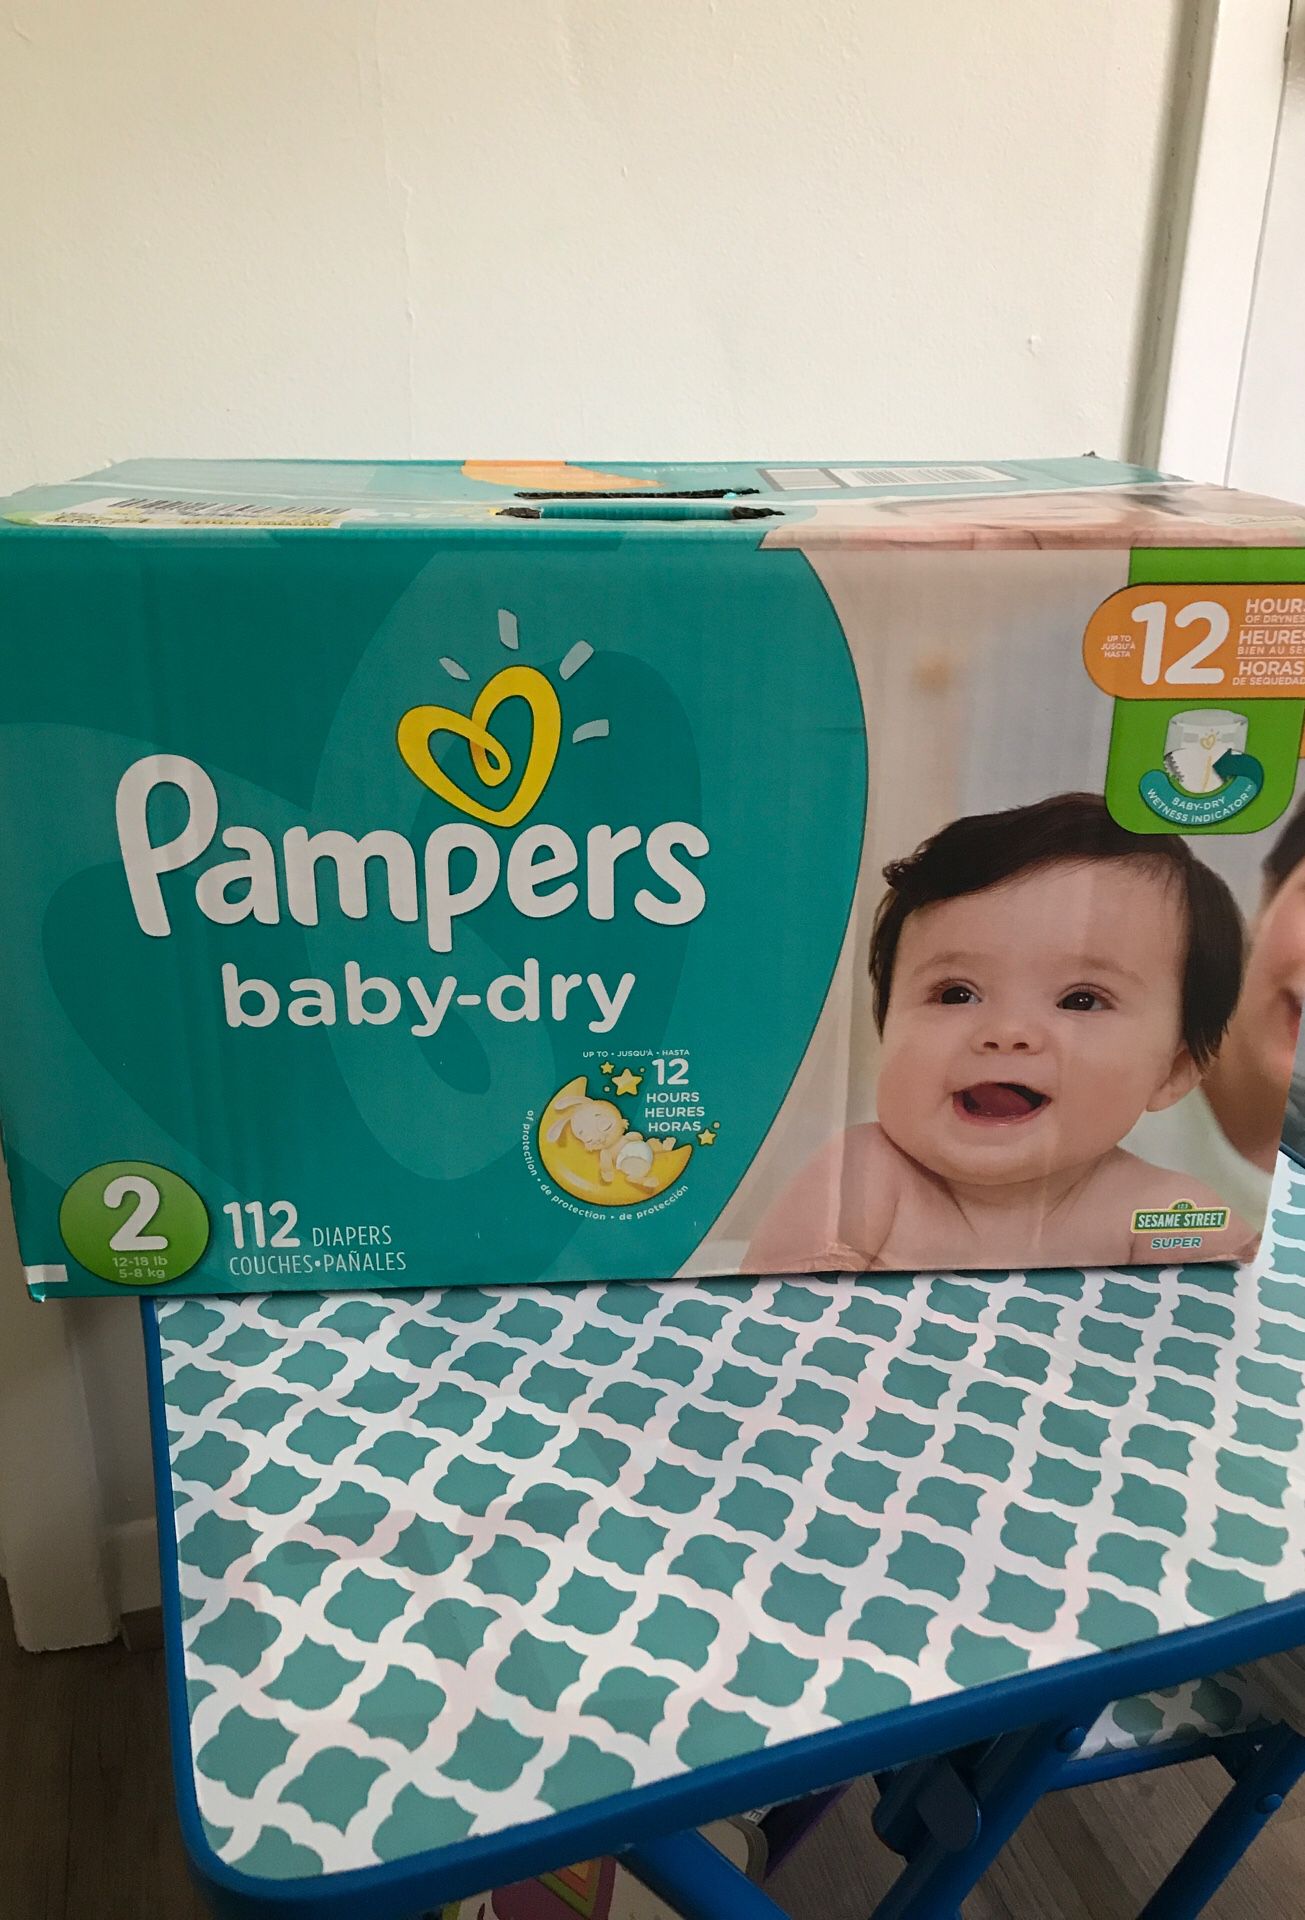 Diapers: Pampers Baby Dry 112 count size 2. New box